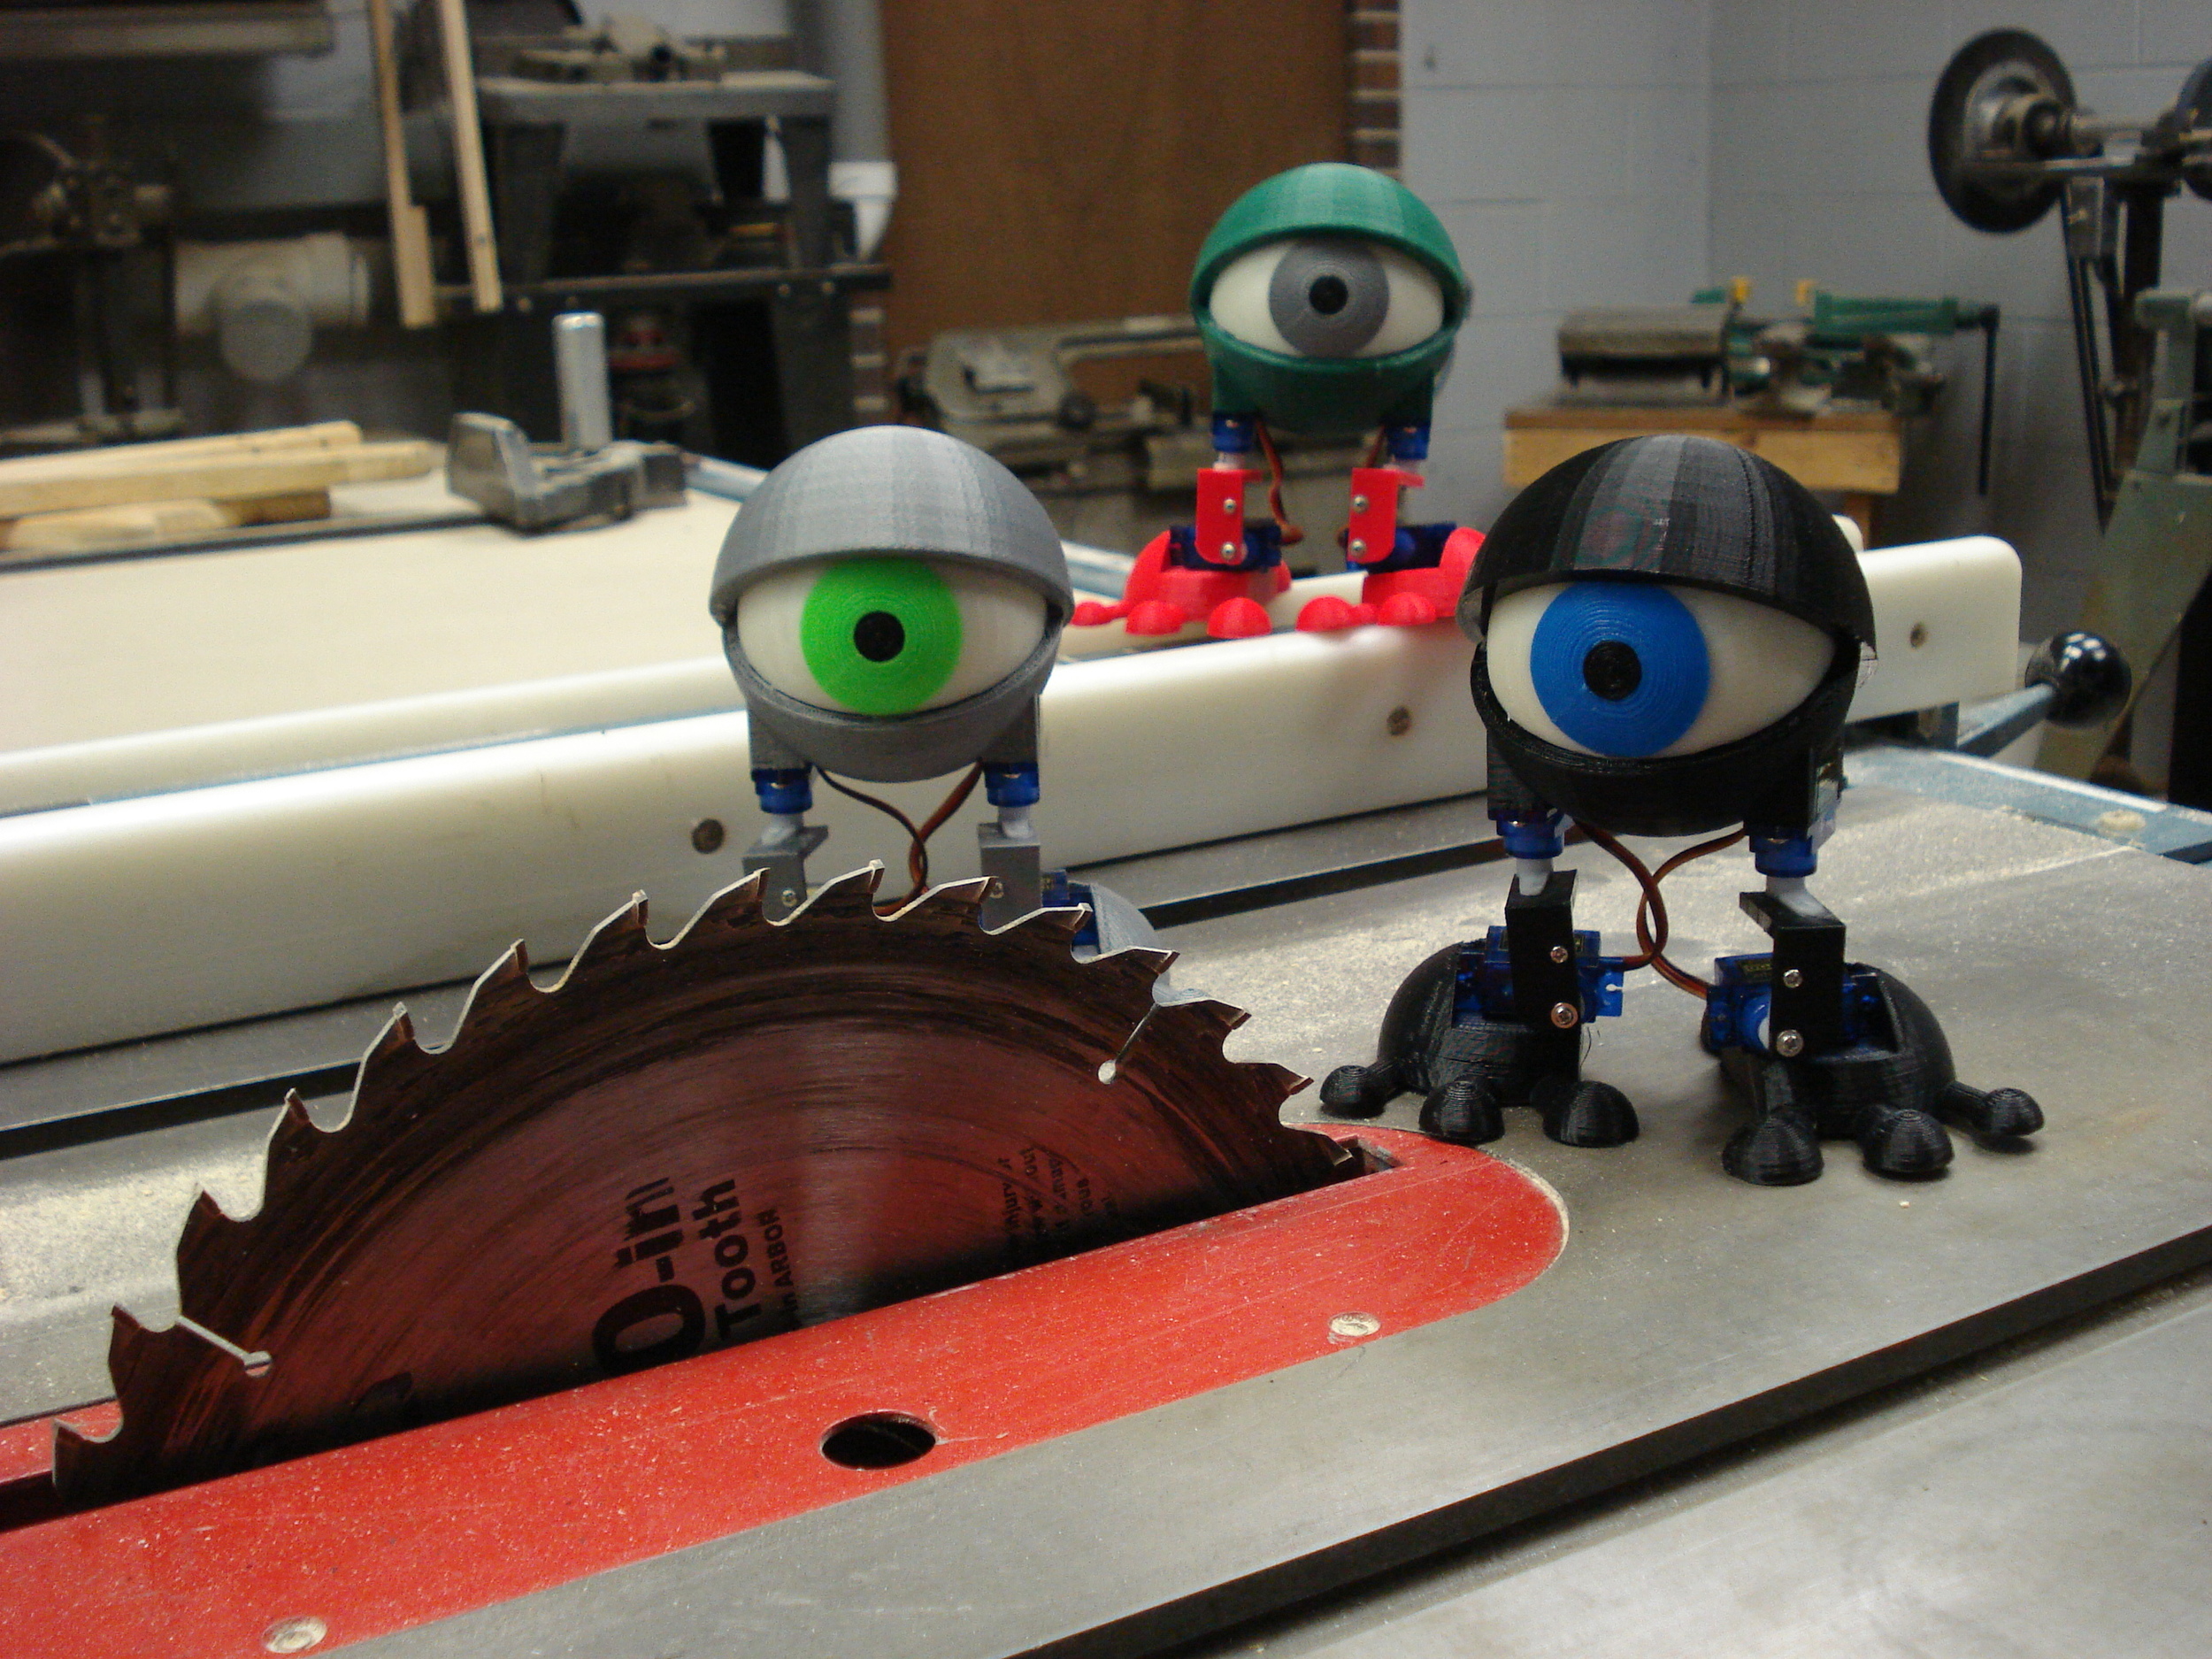  Minions, you should really be wearing safety goggels...   @makerbot   @makerfairekc  